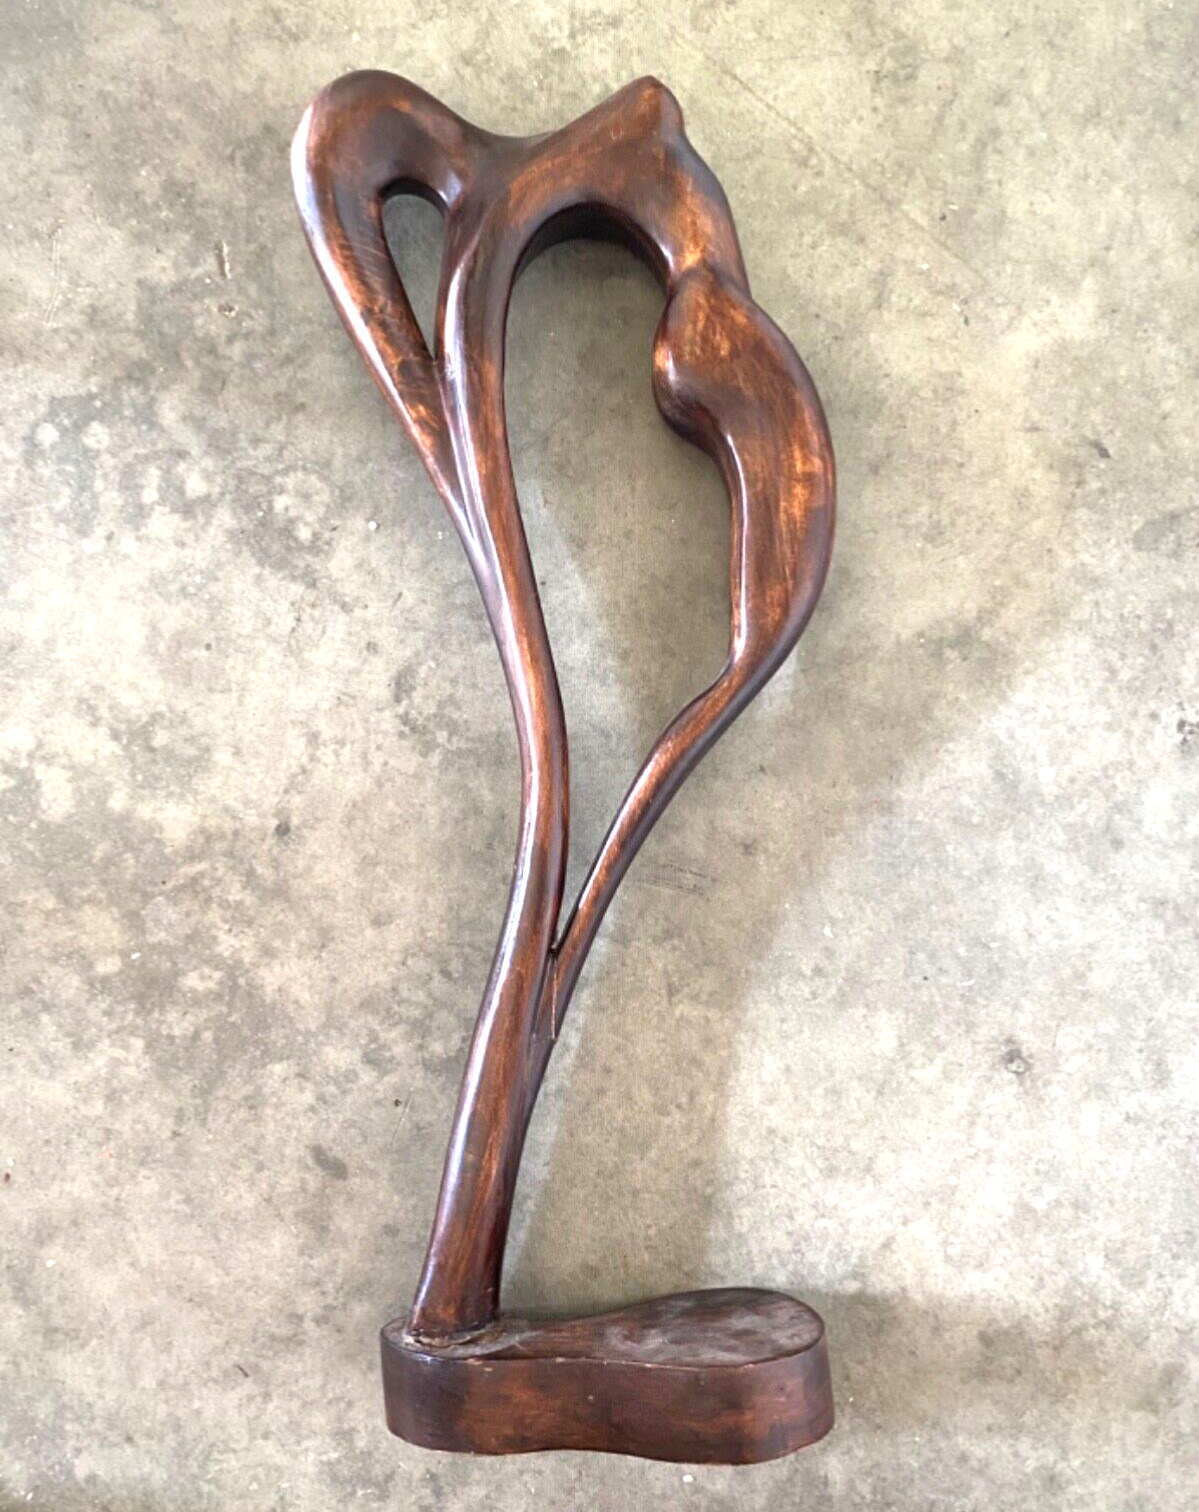 Large Wooden Carved Statue of Nude Woman, Made in Armenia, abstract Art, 2' Tall